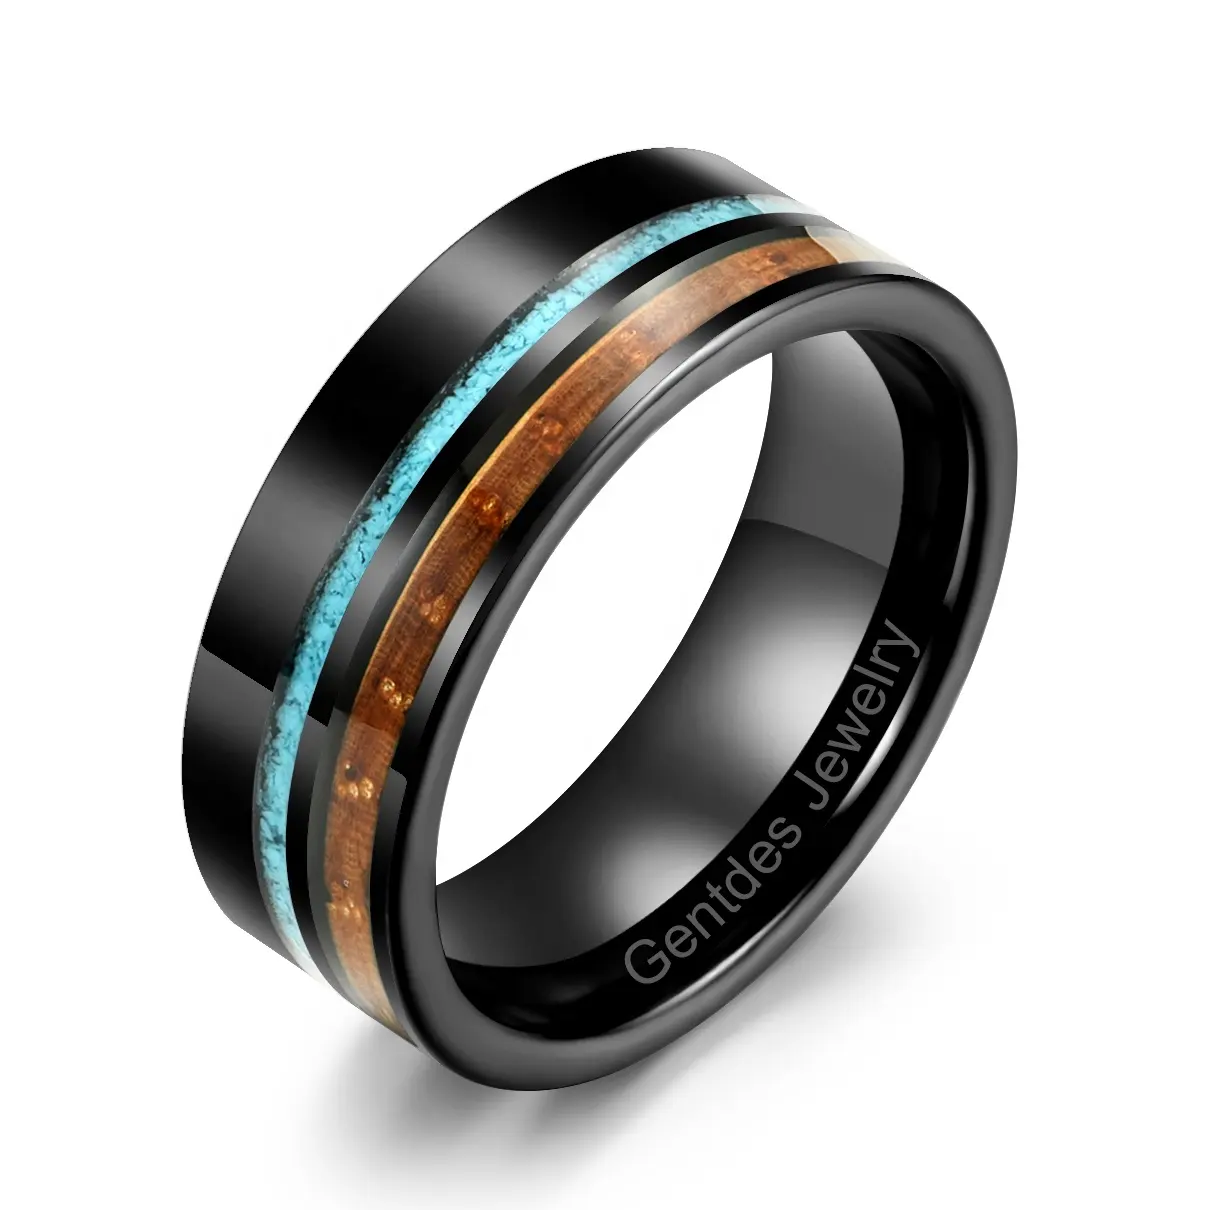 Gentdes Jewelry 8MM Black Flat Tungsten Rings Crushed Turquoise& Whiskey Barrel Wood Inlay Ring For Men Wedding Band